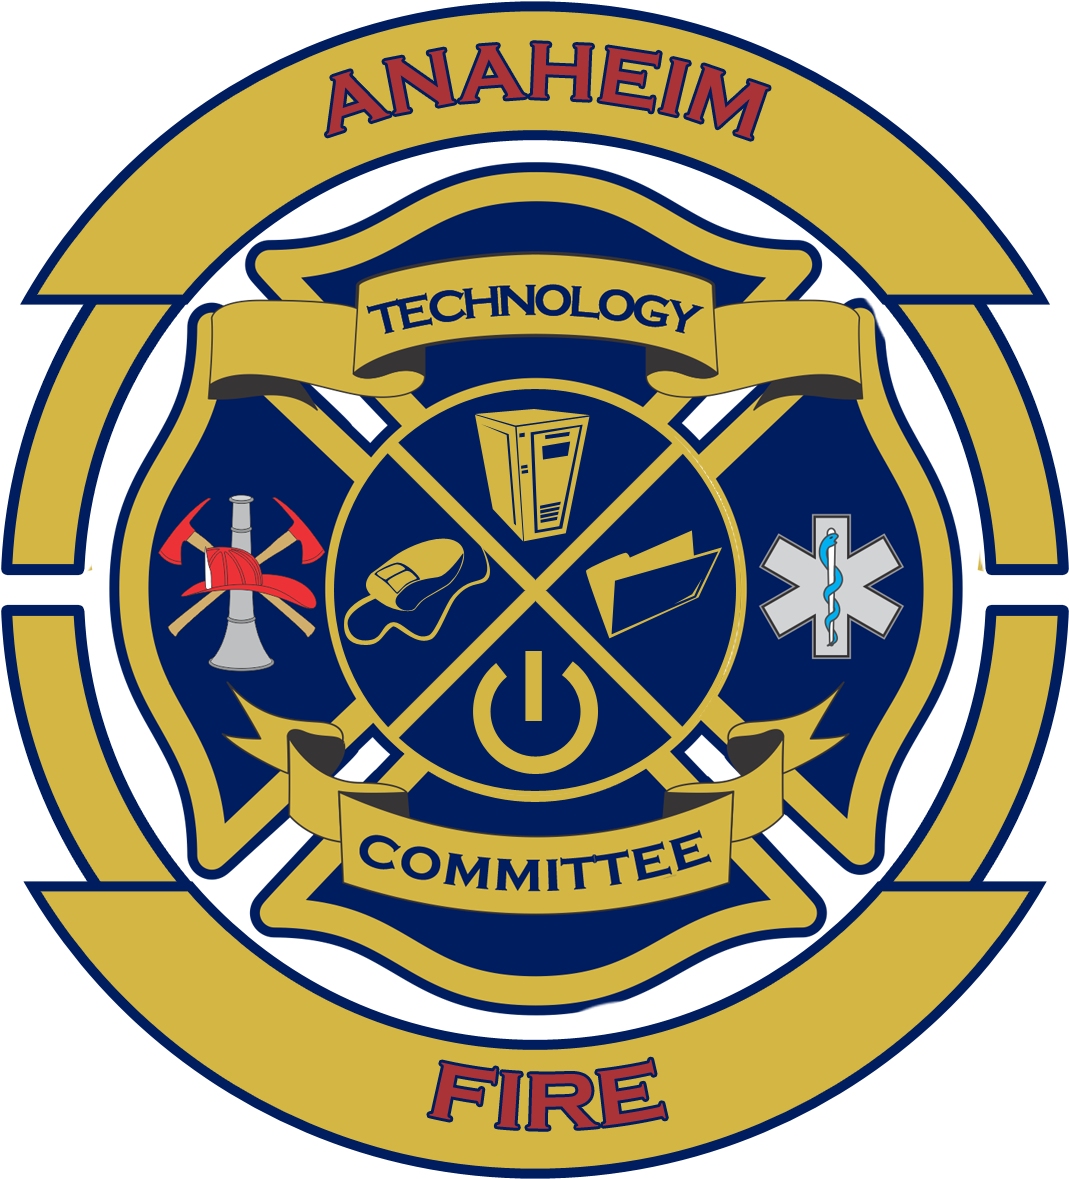 Another Version Of The Fire Department Technology Logo - Fraternal Order Of Police (1200x1200)